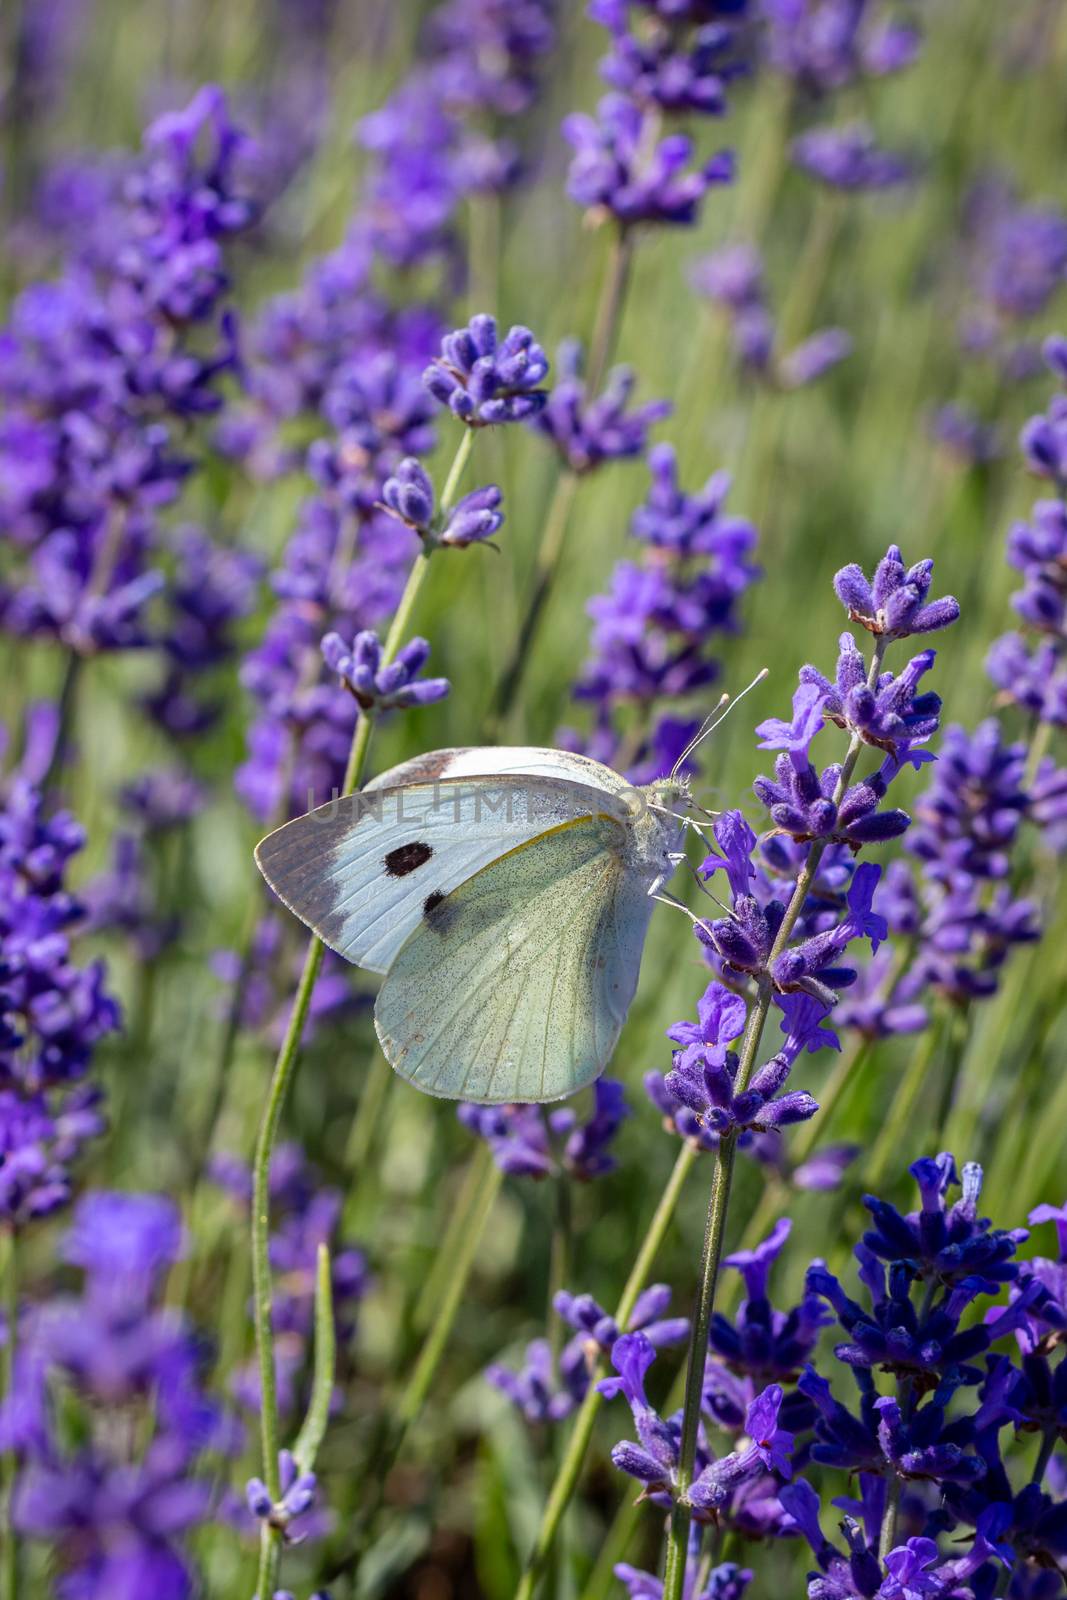 Cabbage White Buterfly (Pieris brassicae) on a lavender flower by magicbones